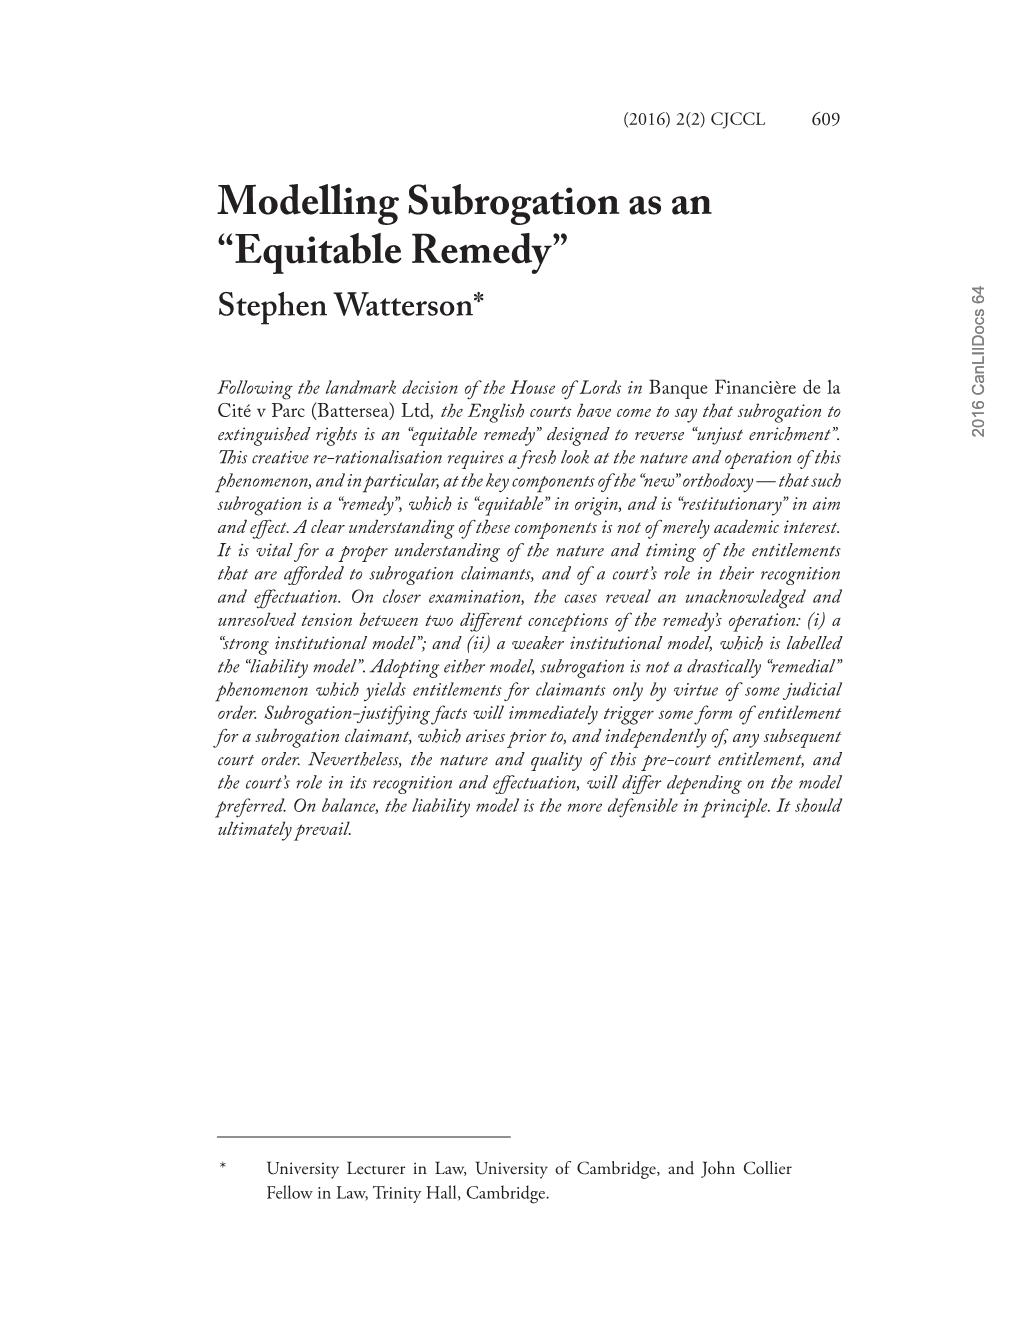 Modelling Subrogation As an “Equitable Remedy” Stephen Watterson*